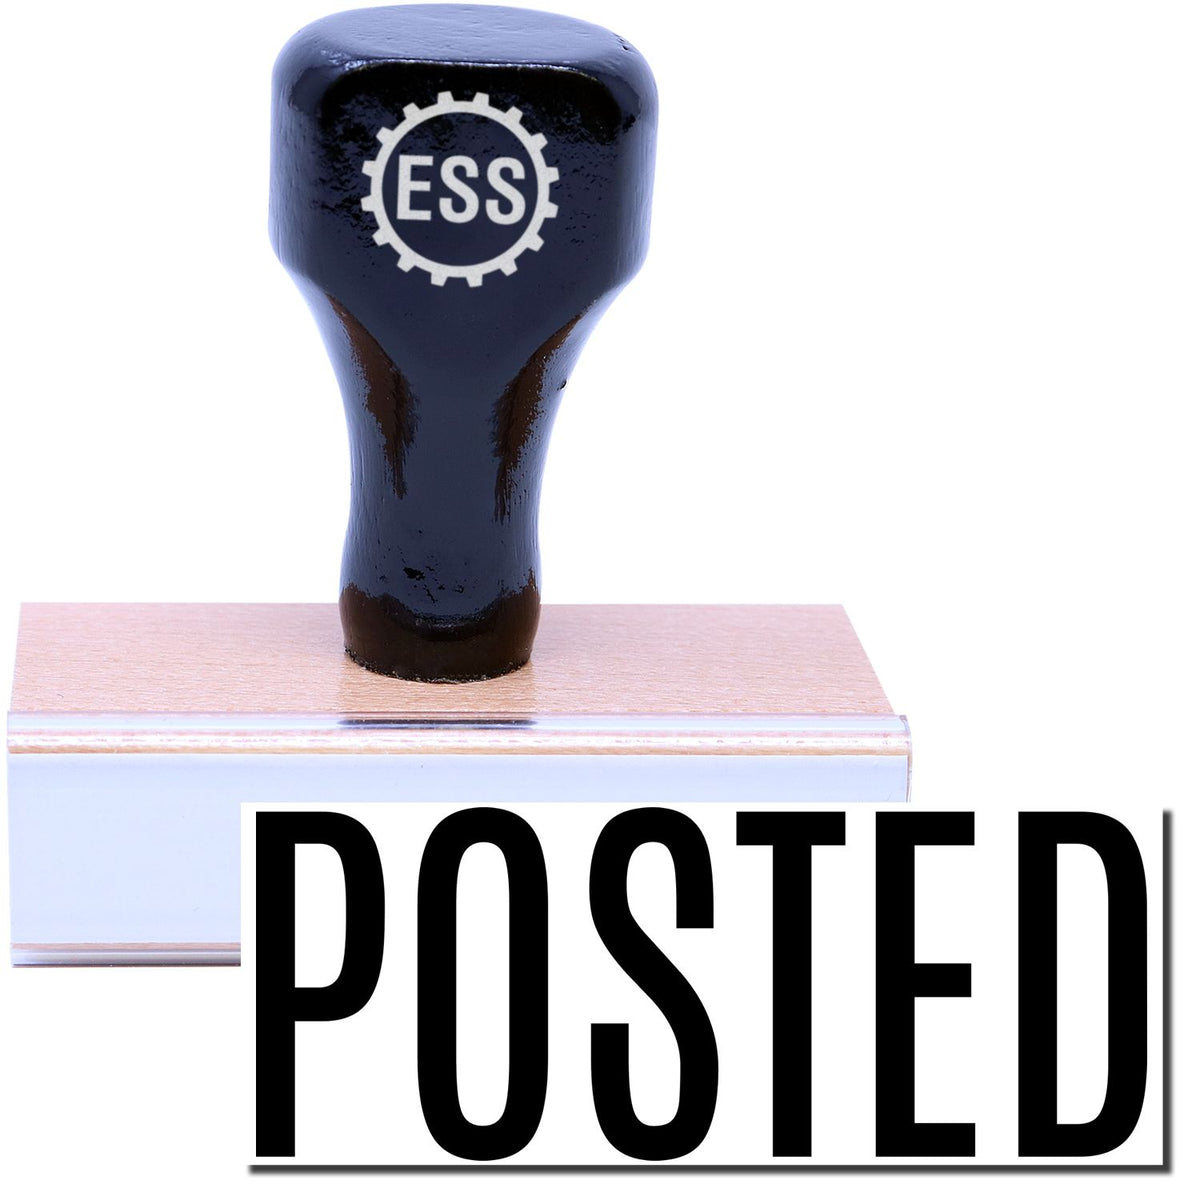 A stock office rubber stamp with a stamped image showing how the text &quot;POSTED&quot; in a narrow font is displayed after stamping.